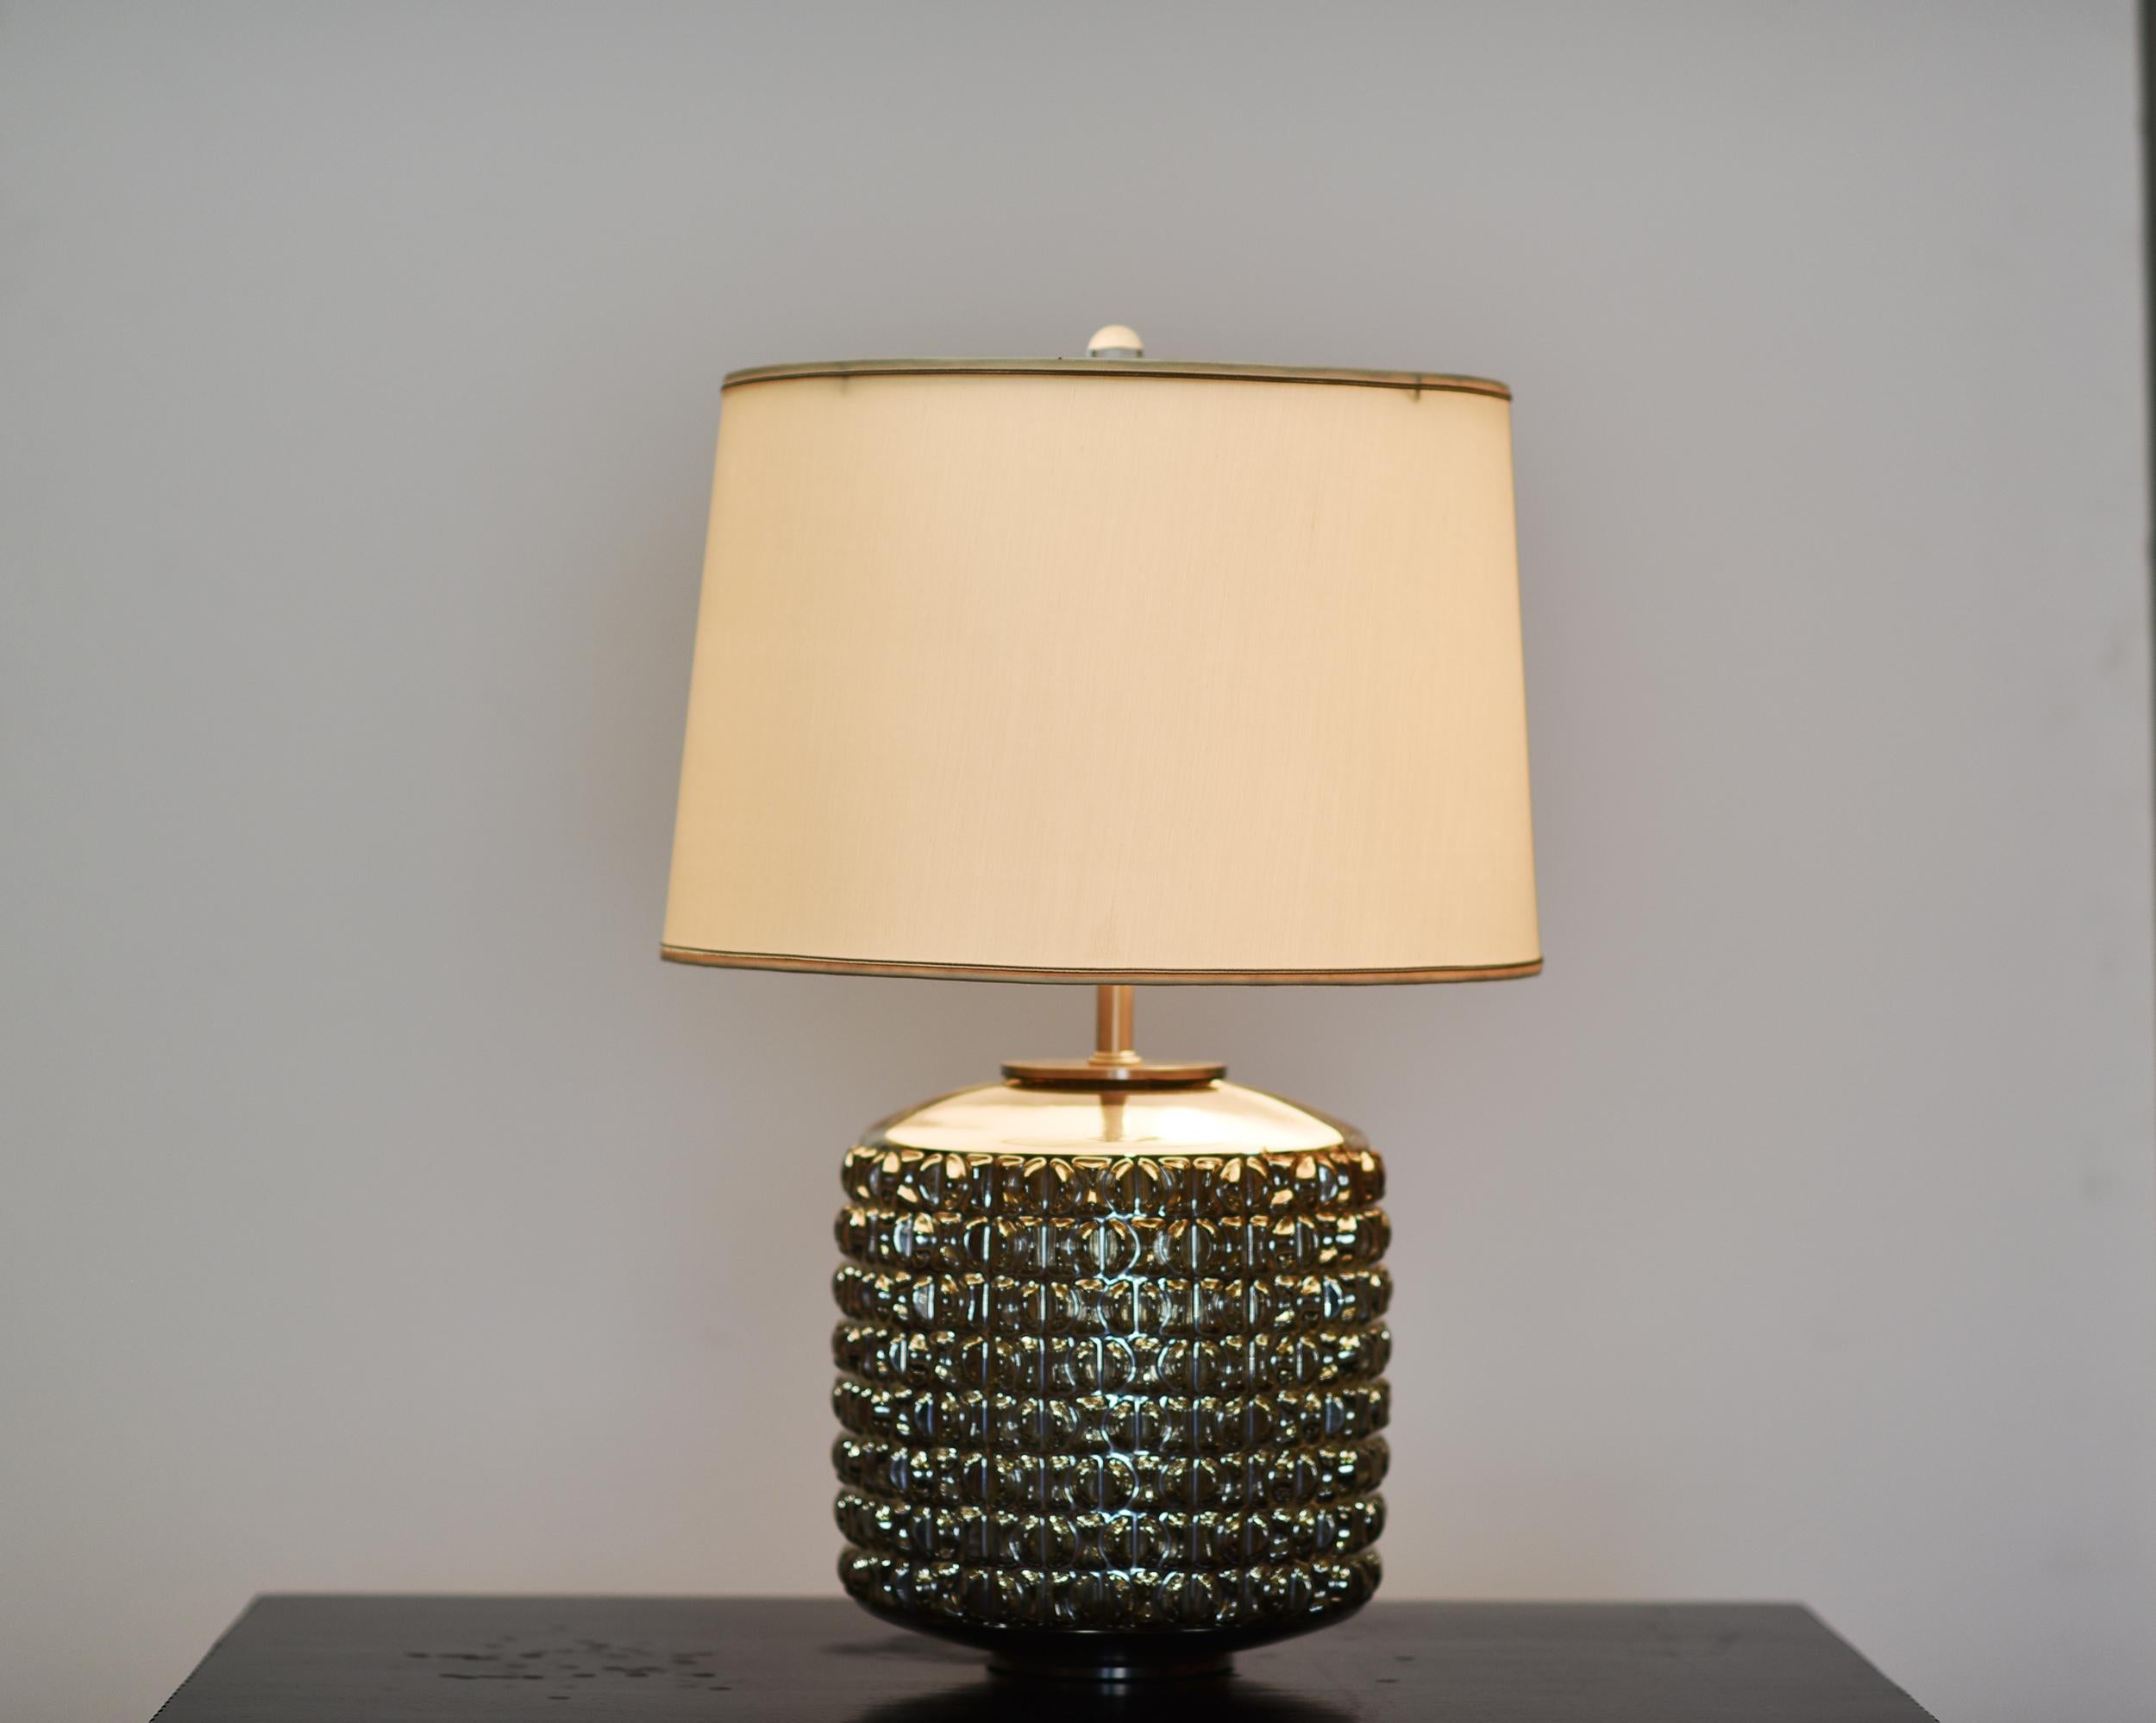 Geometric Mercury Glass Cylinder TABLE LAMP In Good Condition For Sale In Hawthorne, CA